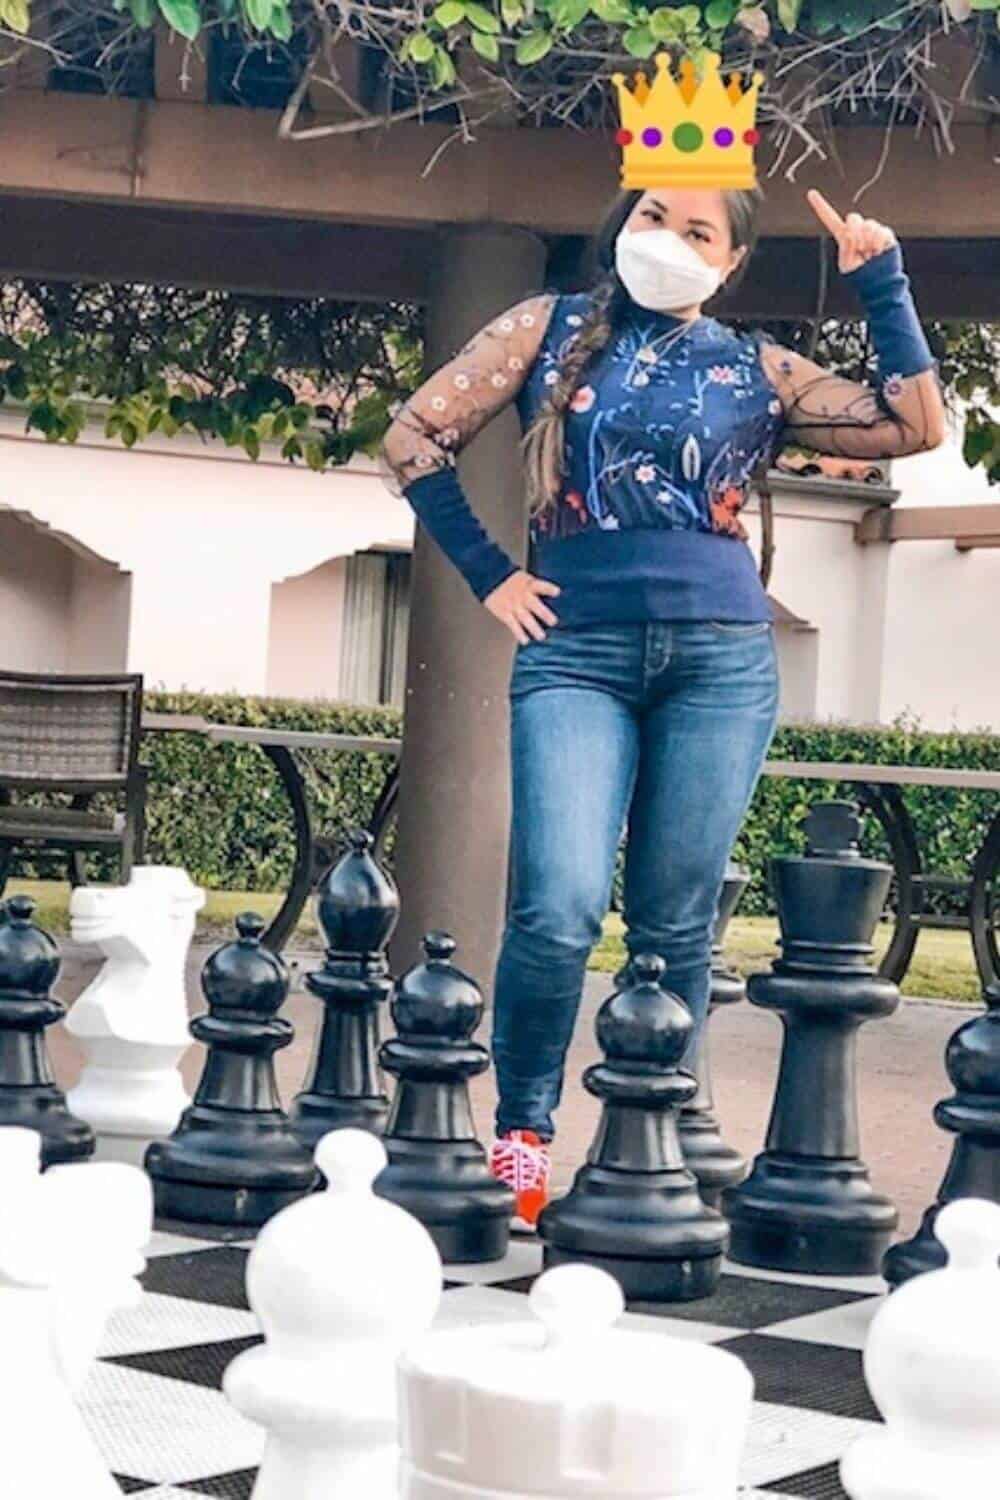 Girl standing on life size chess board in blue sweater and jeans with COVID-19 N95 mask pointing to a yellow emoji queen's crown on her head at the Hilton Santa Barbara